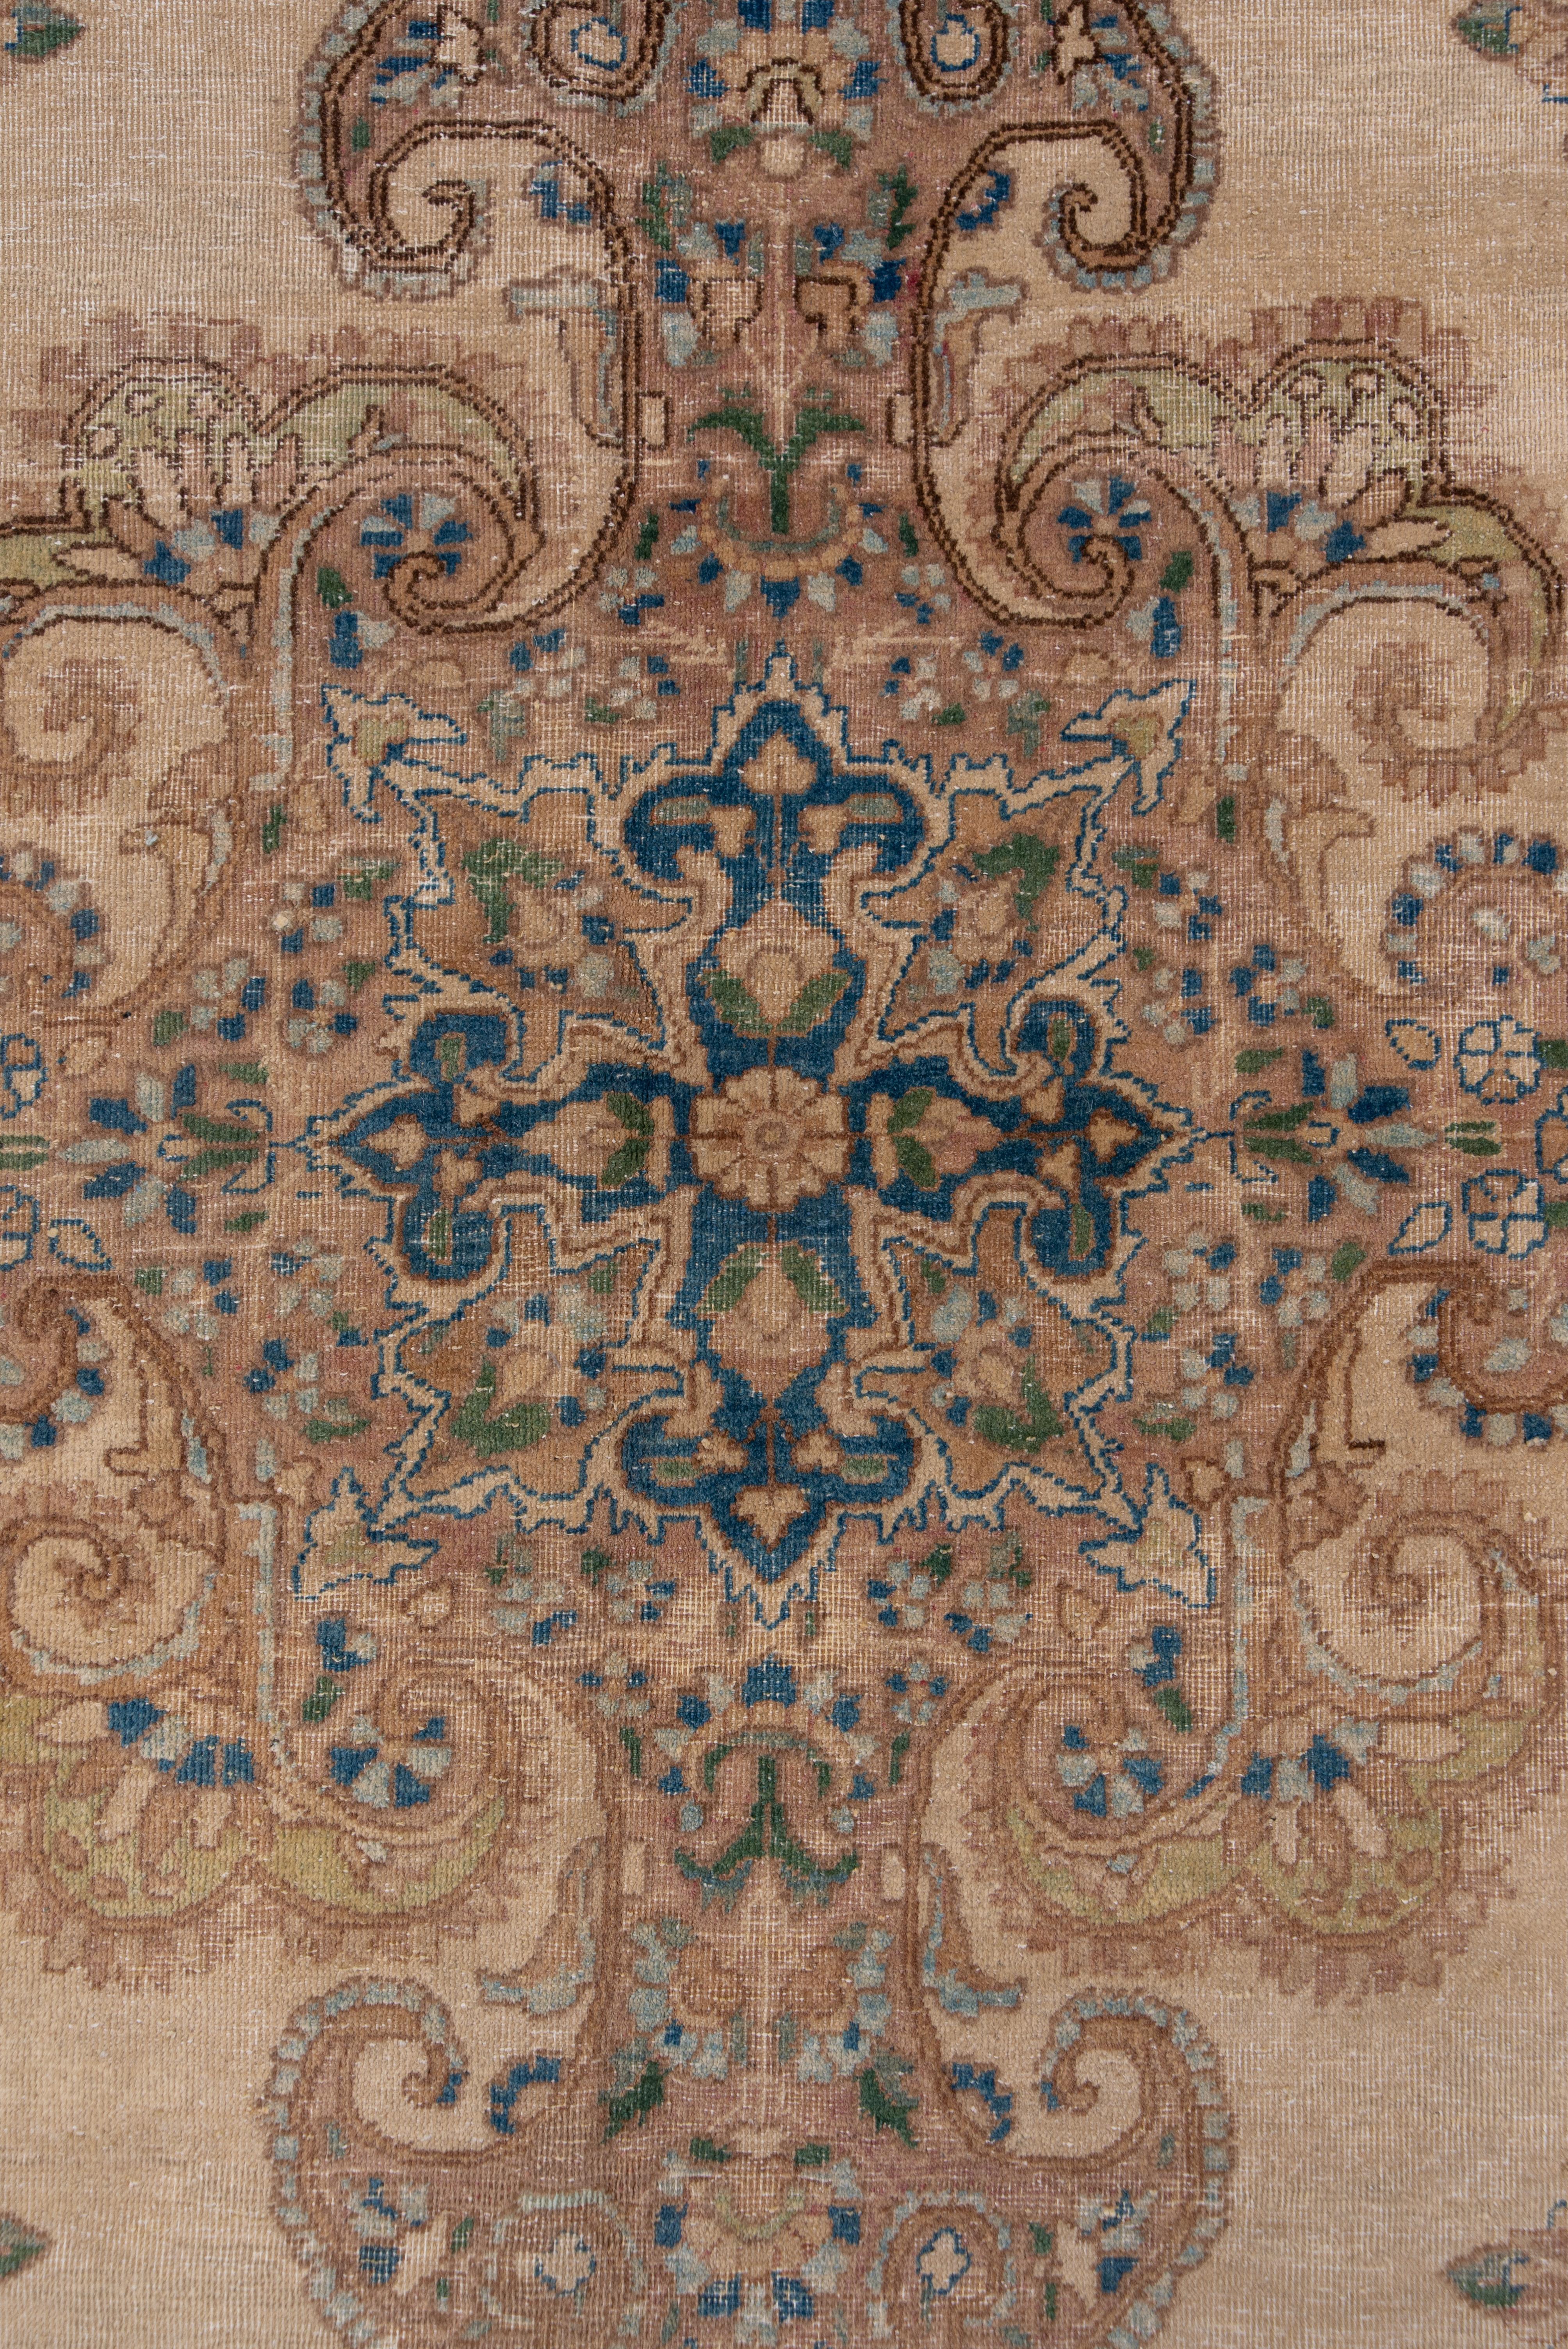 This predominantly light colored SE Persian city rug has an old ivory field with a sharply involuted cruciform four pendanted medallion with a light blue centre. The corners point toward the centre with floriated palmettes. The beige ivory border